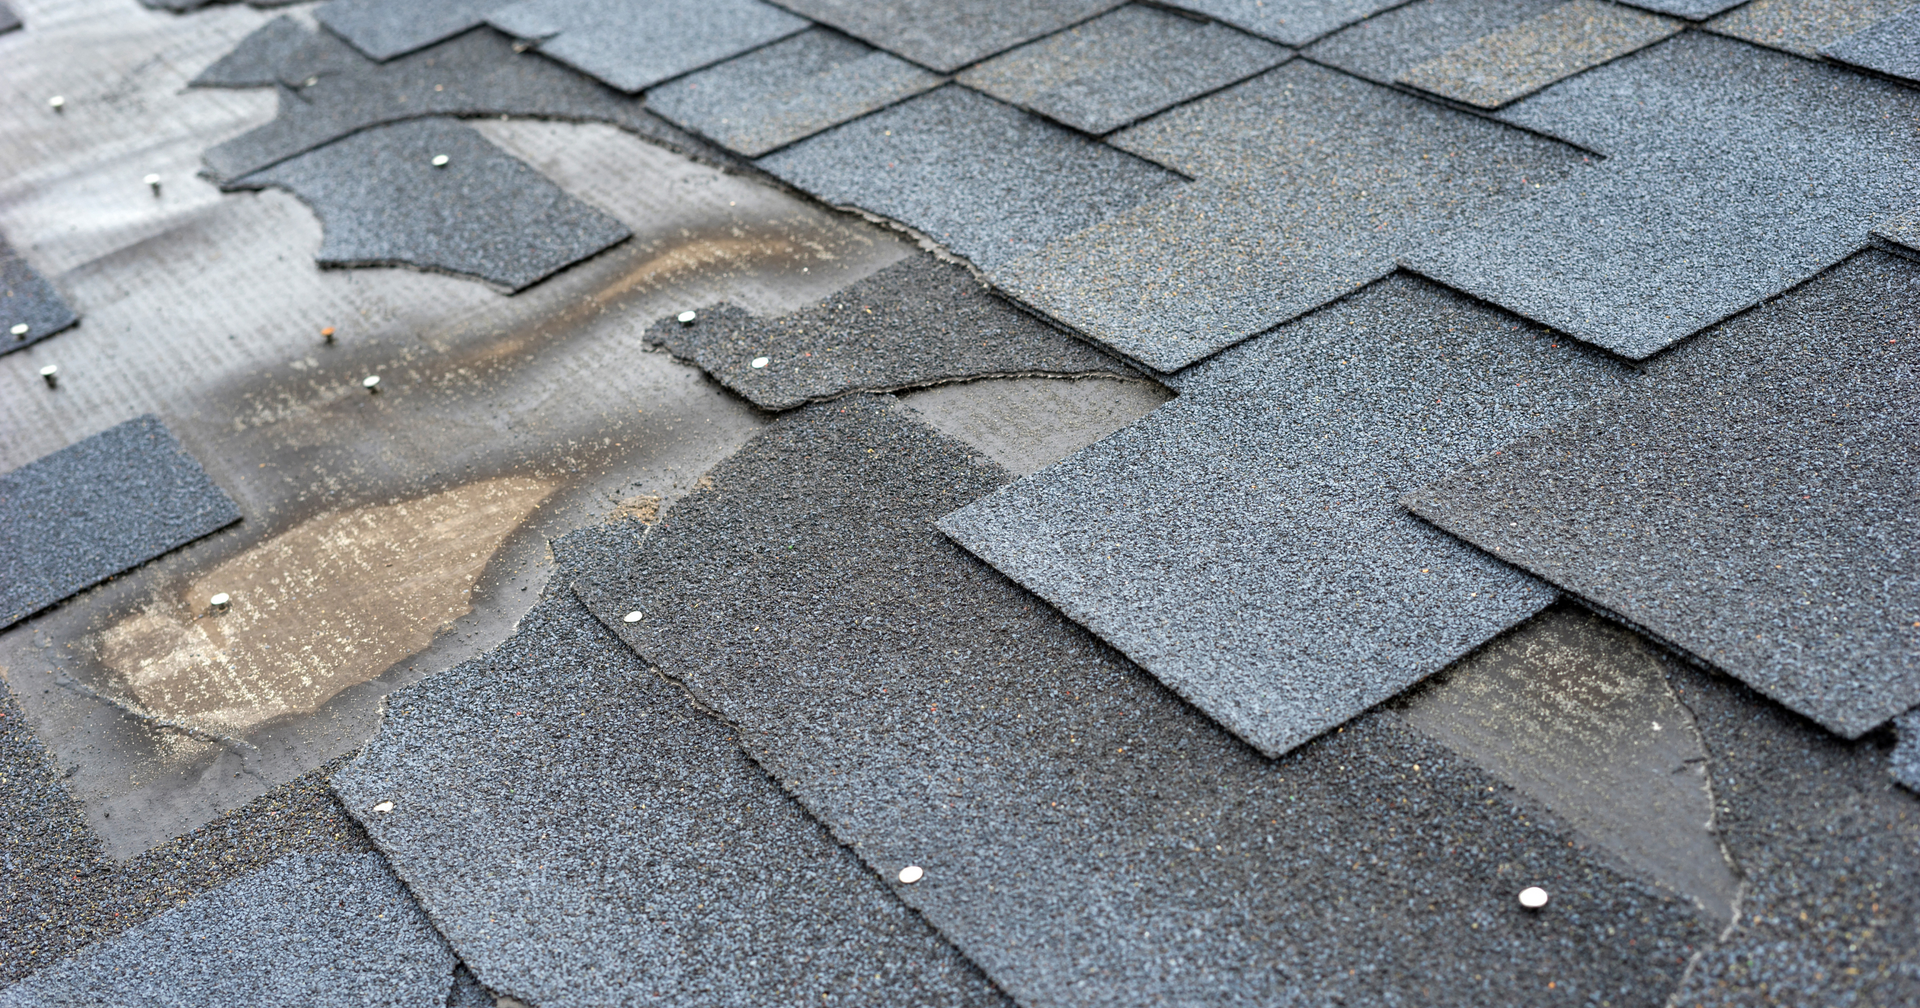 Protecting Your Home with Timely Roof Maintenance